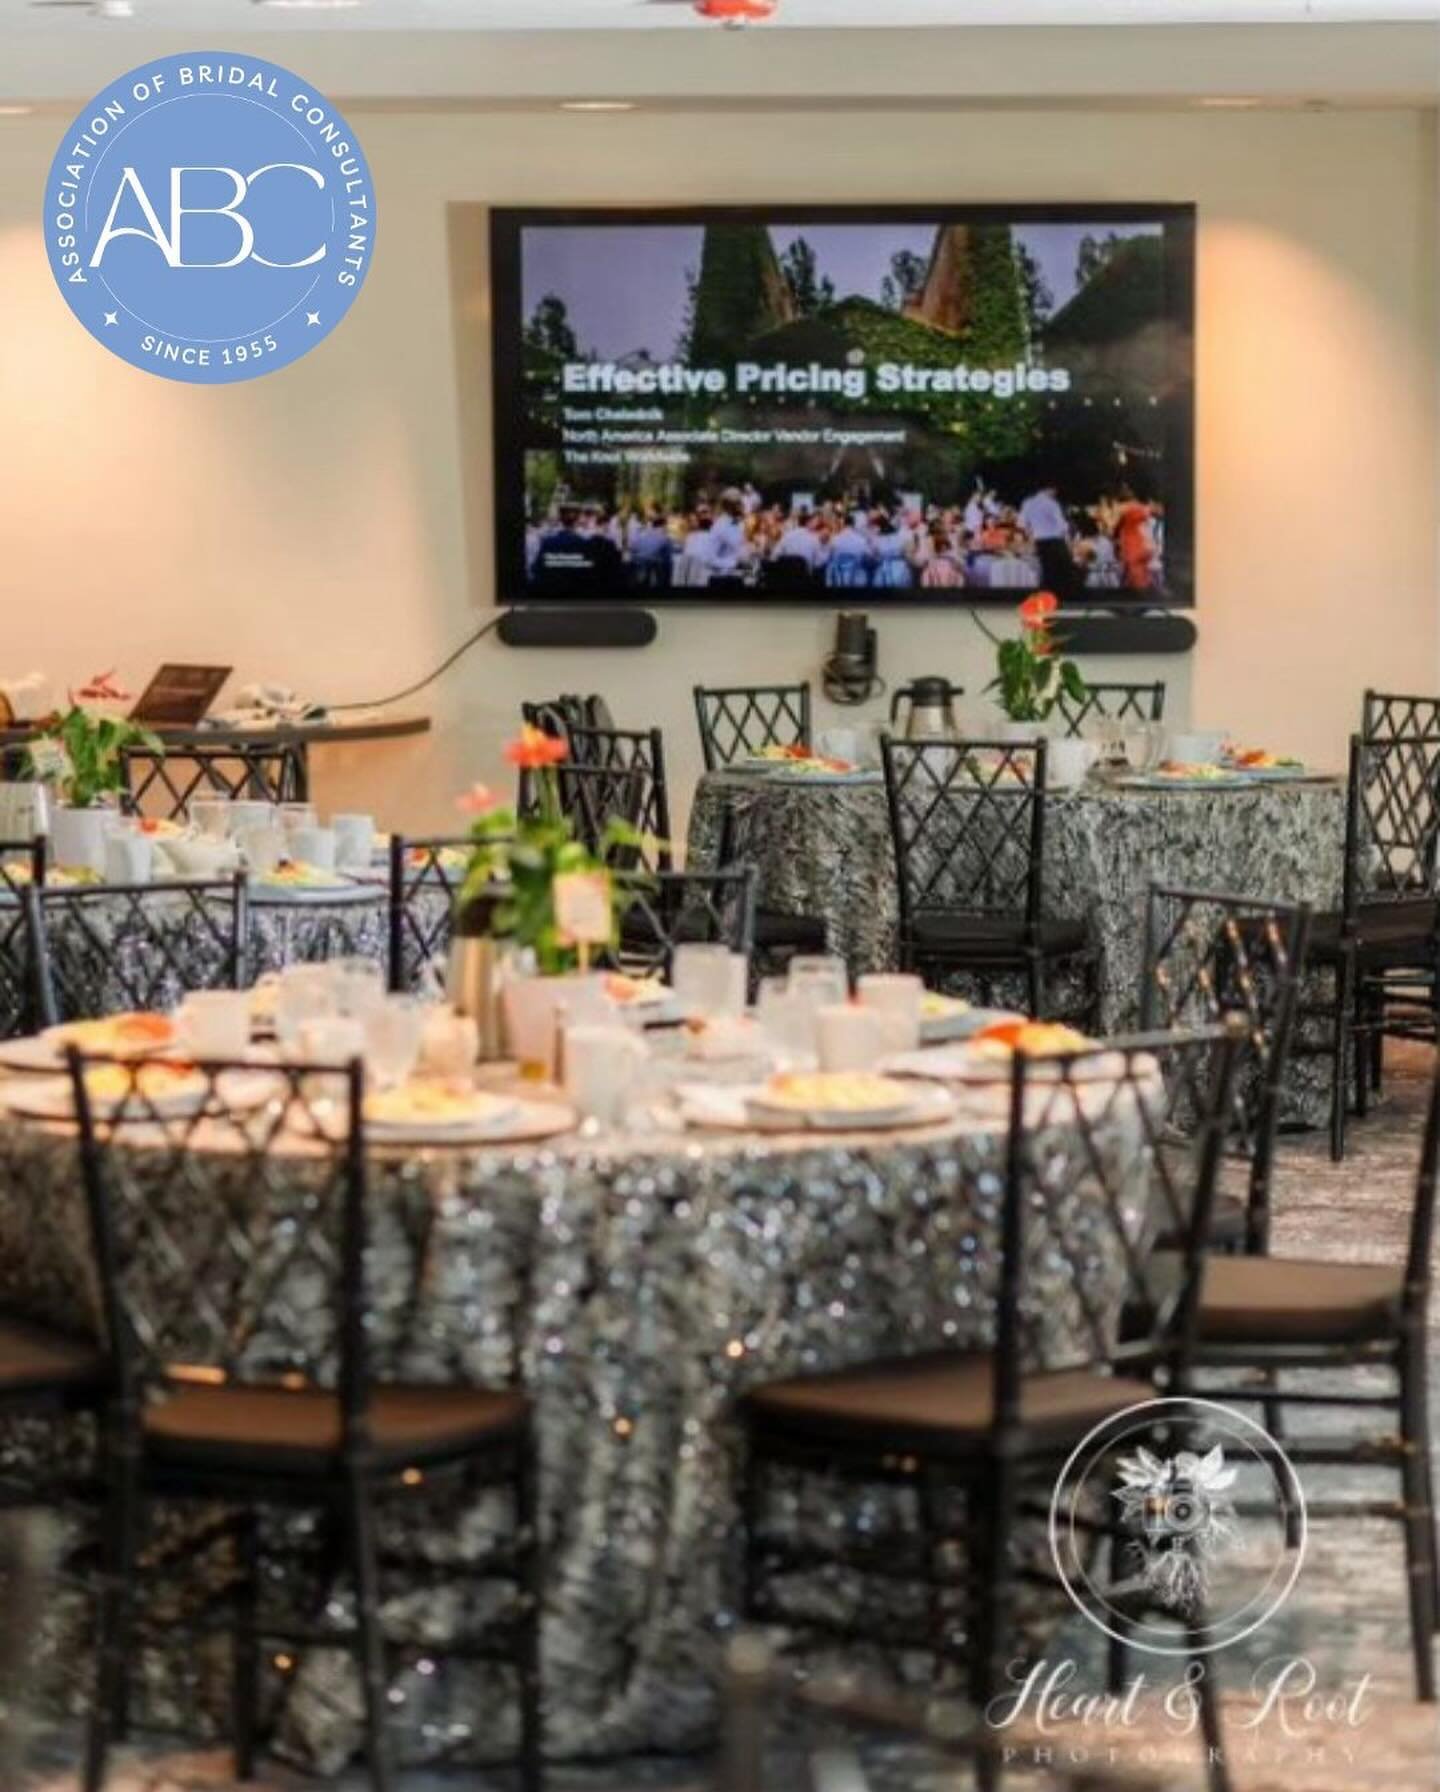 It&rsquo;s been a busy week for our @abcassoc members across the USA! There have been multiple events designed specifically for wedding professionals in many of the various states to bring educational and networking opportunities - a chance to get to